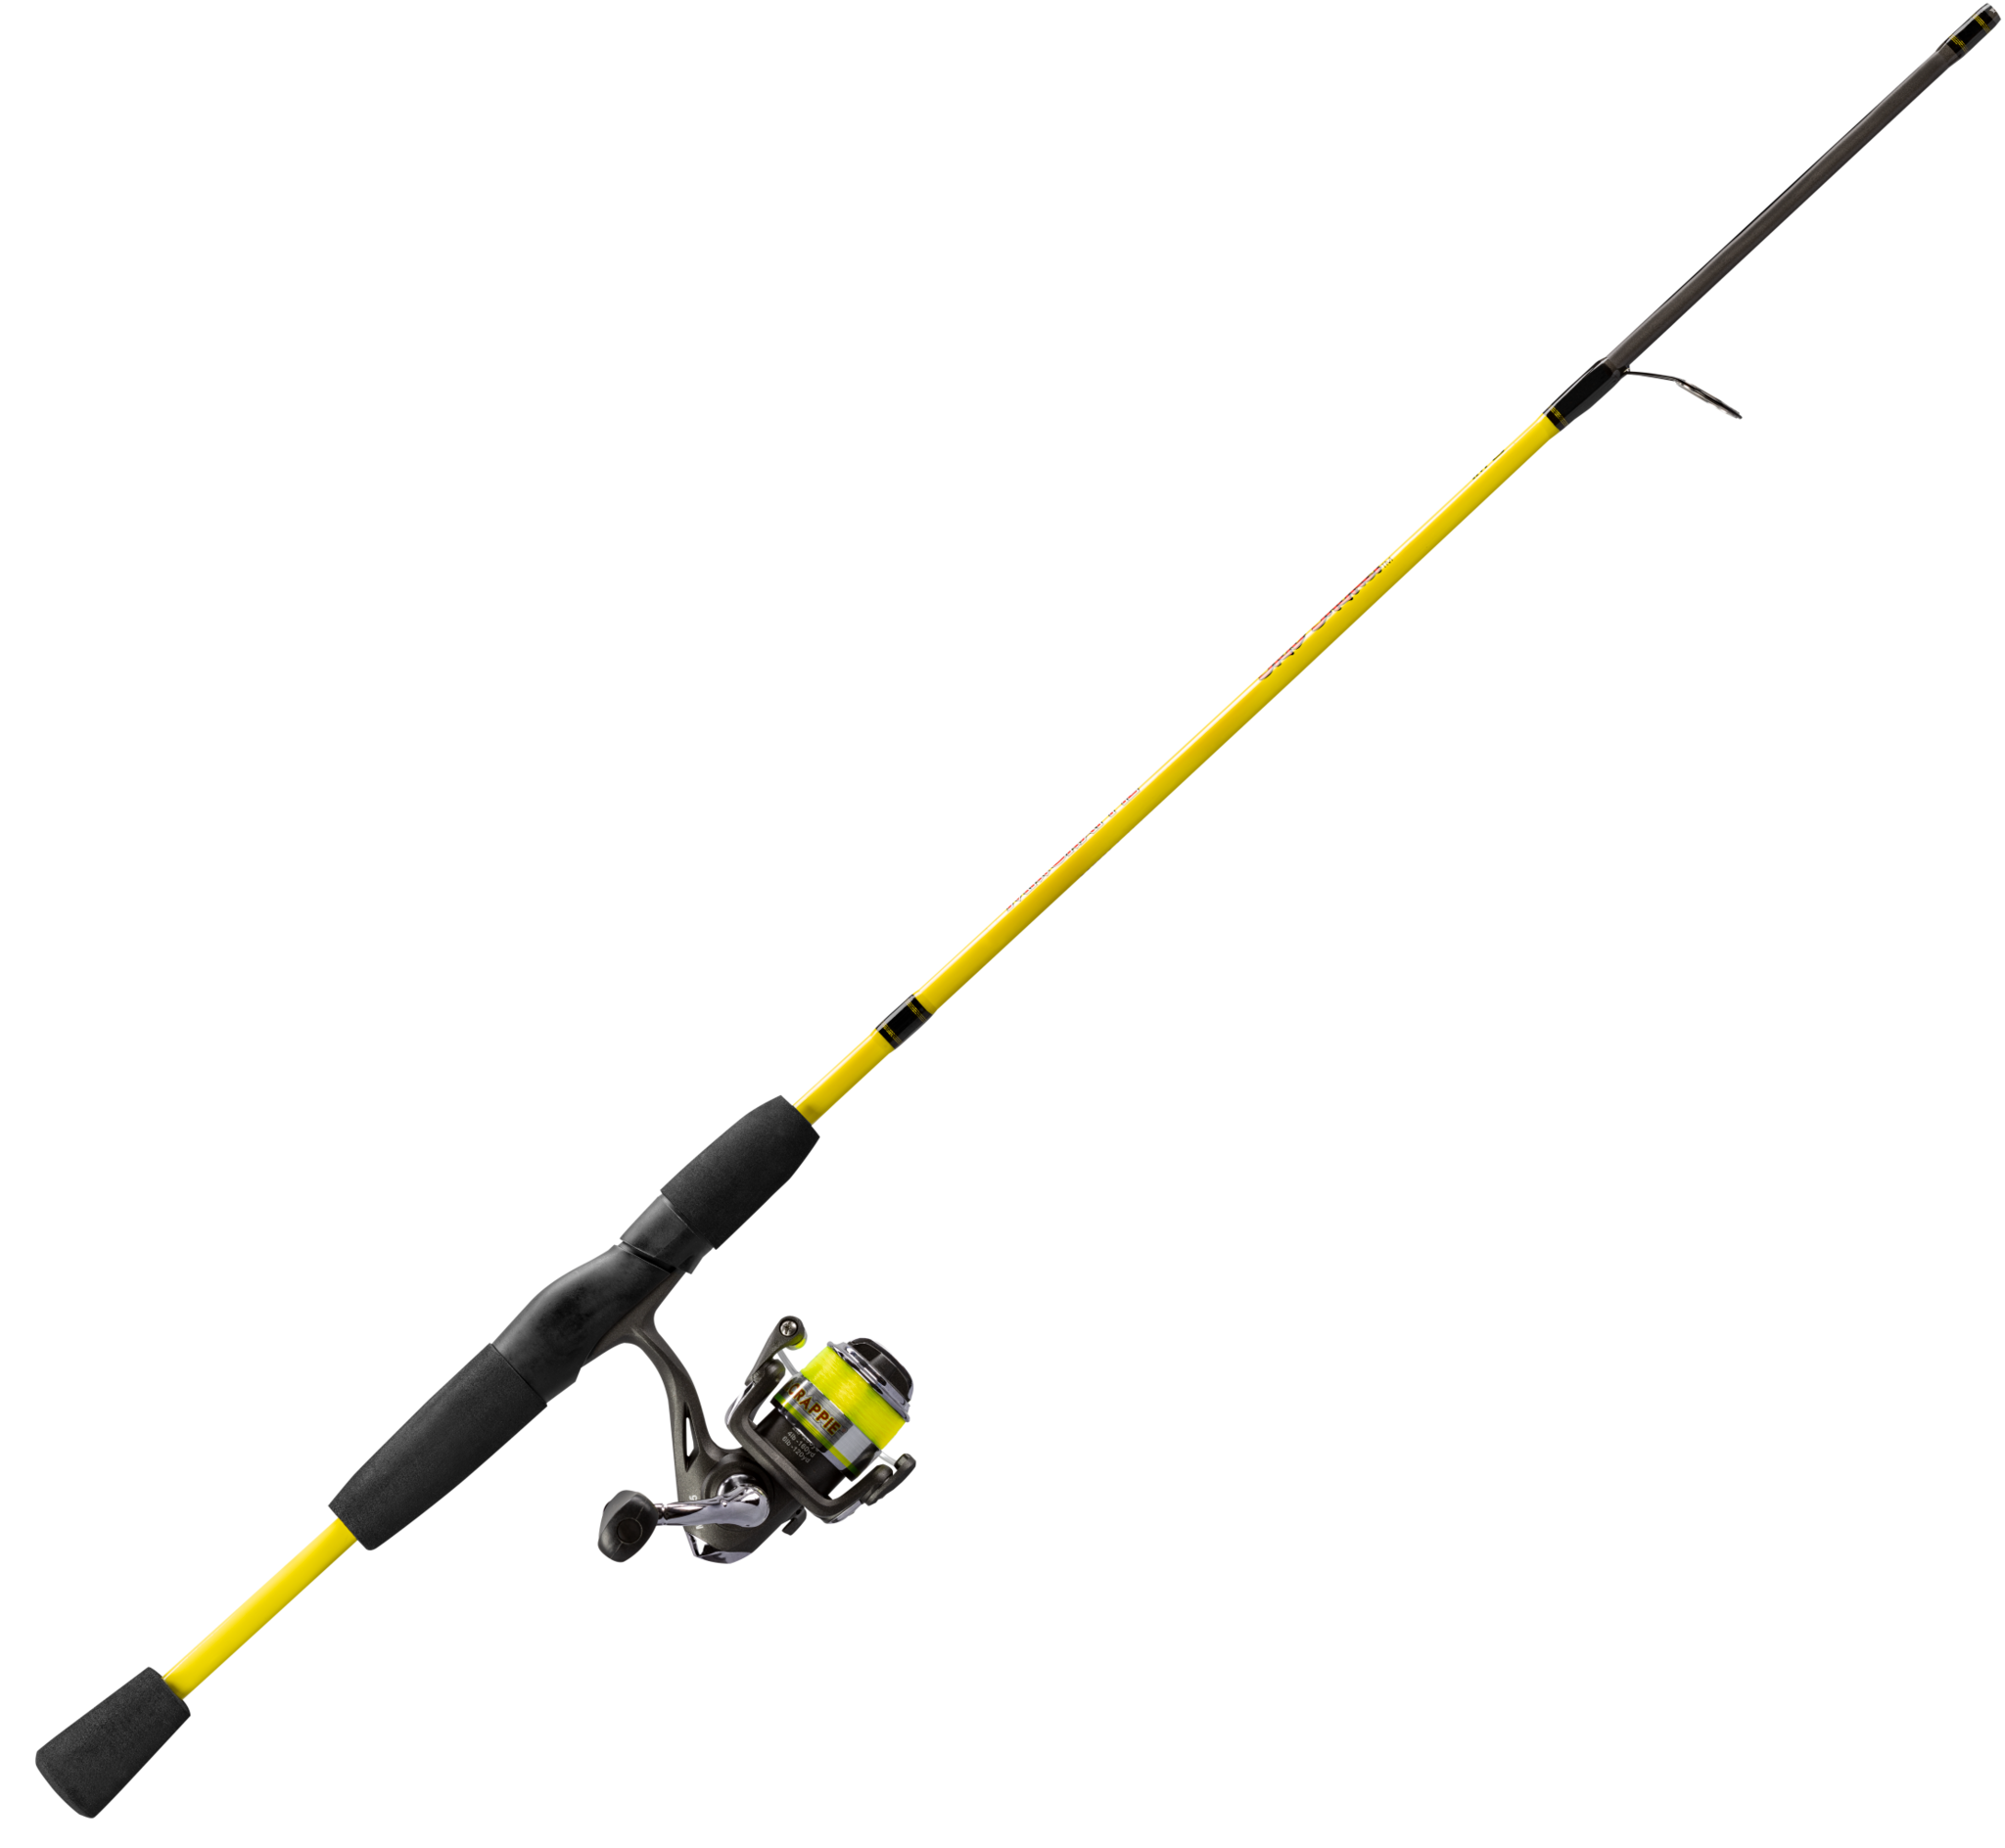 Mr. Crappie Slab Shaker Spinning Rod and Reel Fishing Combo - image 1 of 12